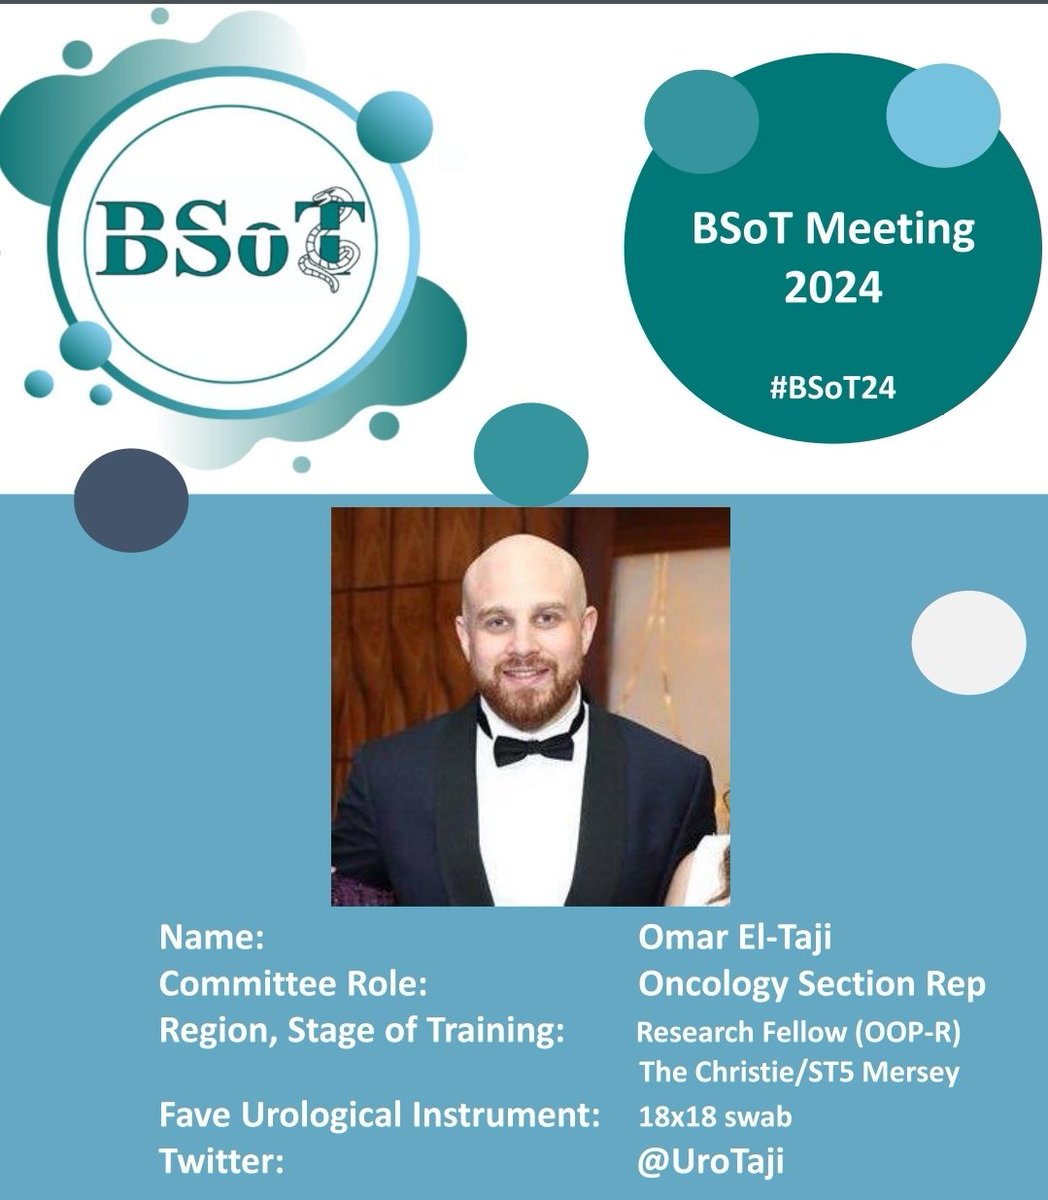 🌟#BSoT24 Monday 11th March afternoon will feature our #Oncology session, with Chairs Sarah Prattley and @UroTaji our Section of Oncology Representative. Get ready for 🤖💊 @BAUSurology @BURSTurology @RSMUrology #Urology #UroSoMe #Urooncology 🌟